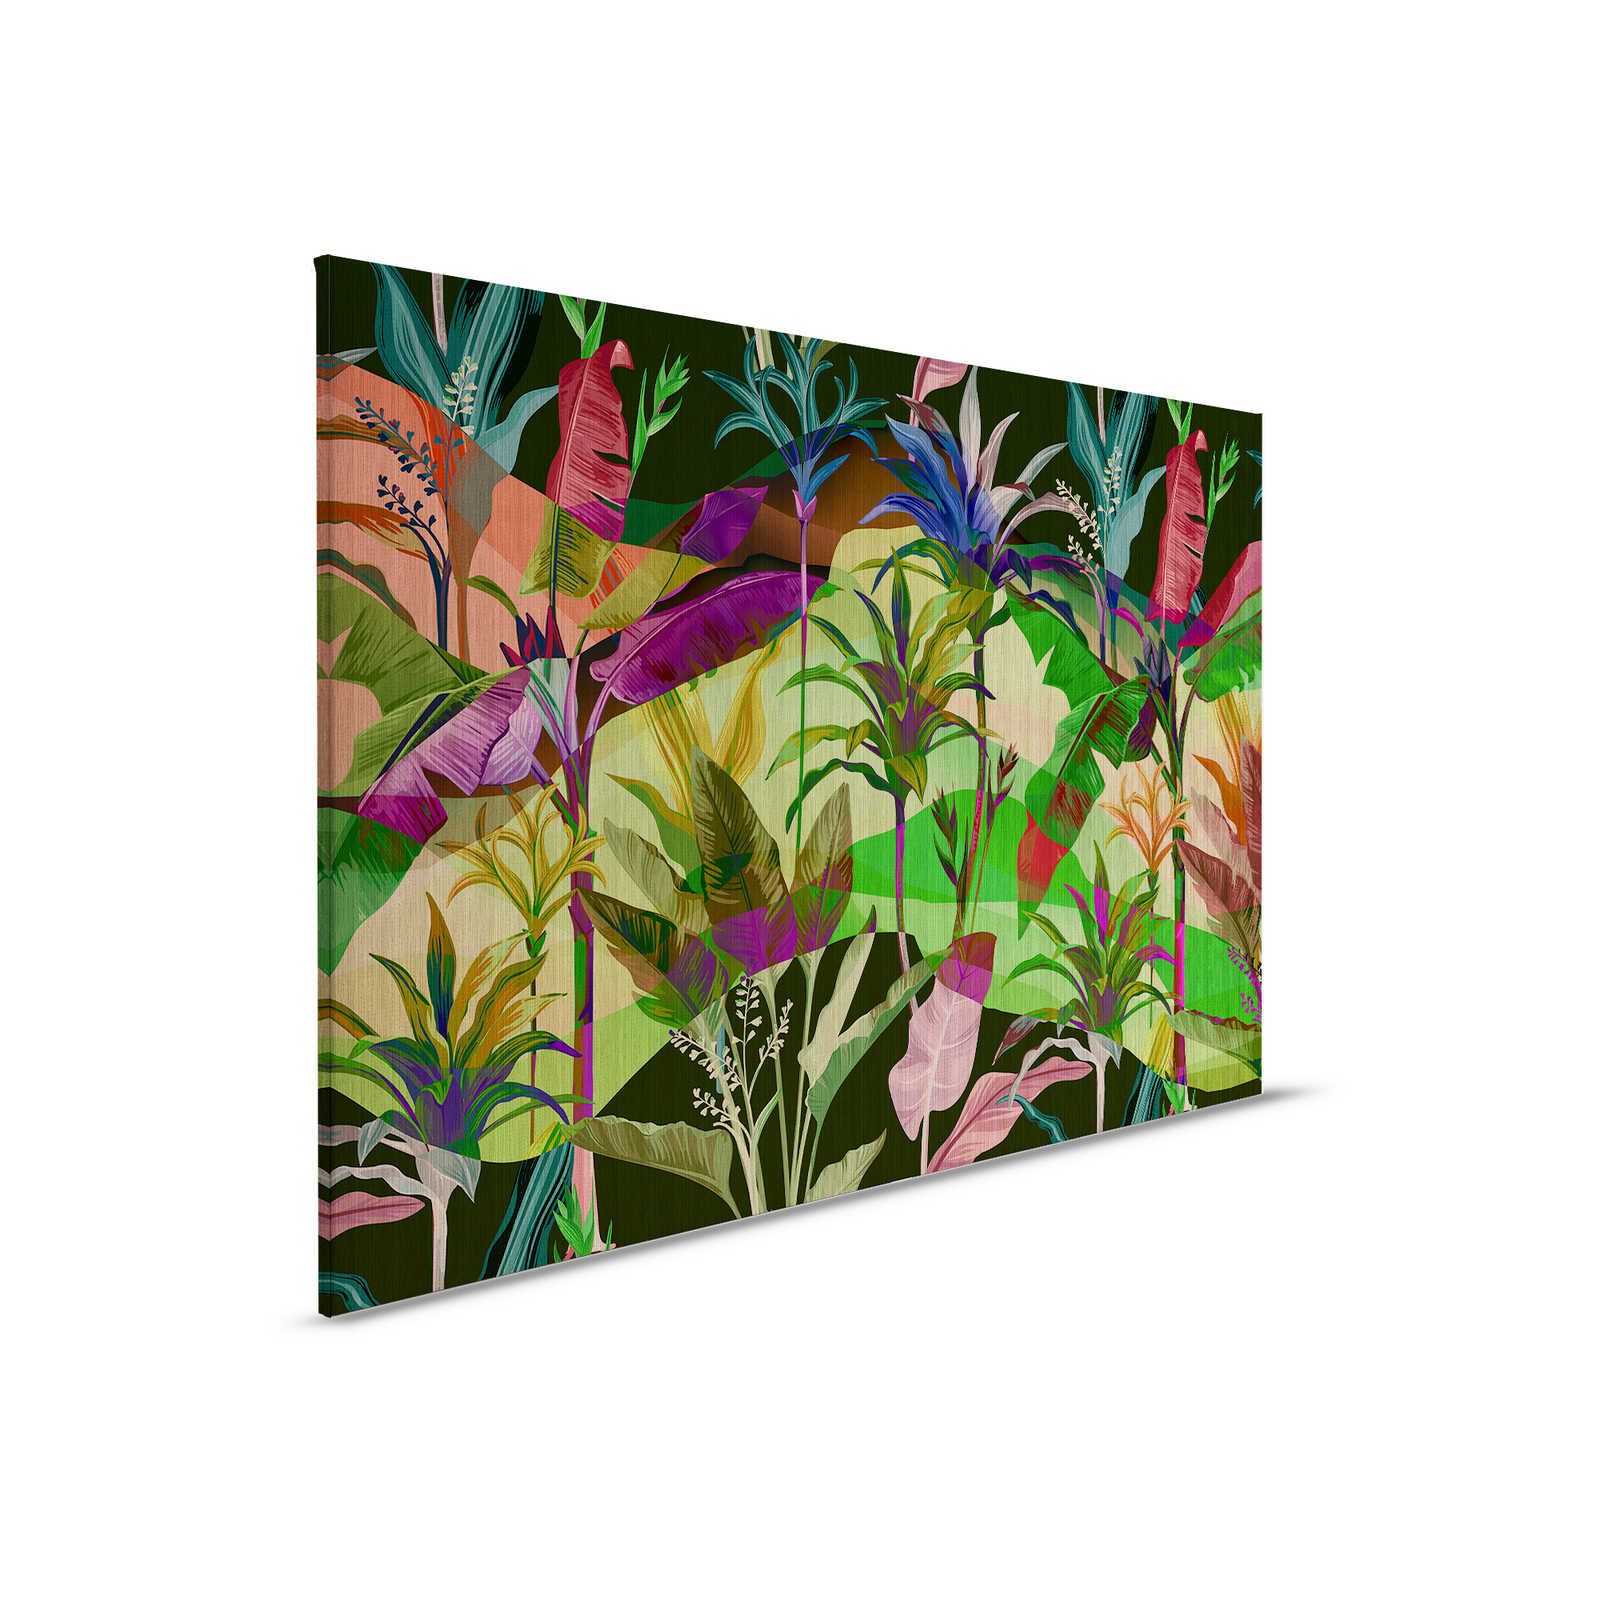 Palmyra 2 - Canvas painting Jungle leaves colourful design - 0,90 m x 0,60 m
